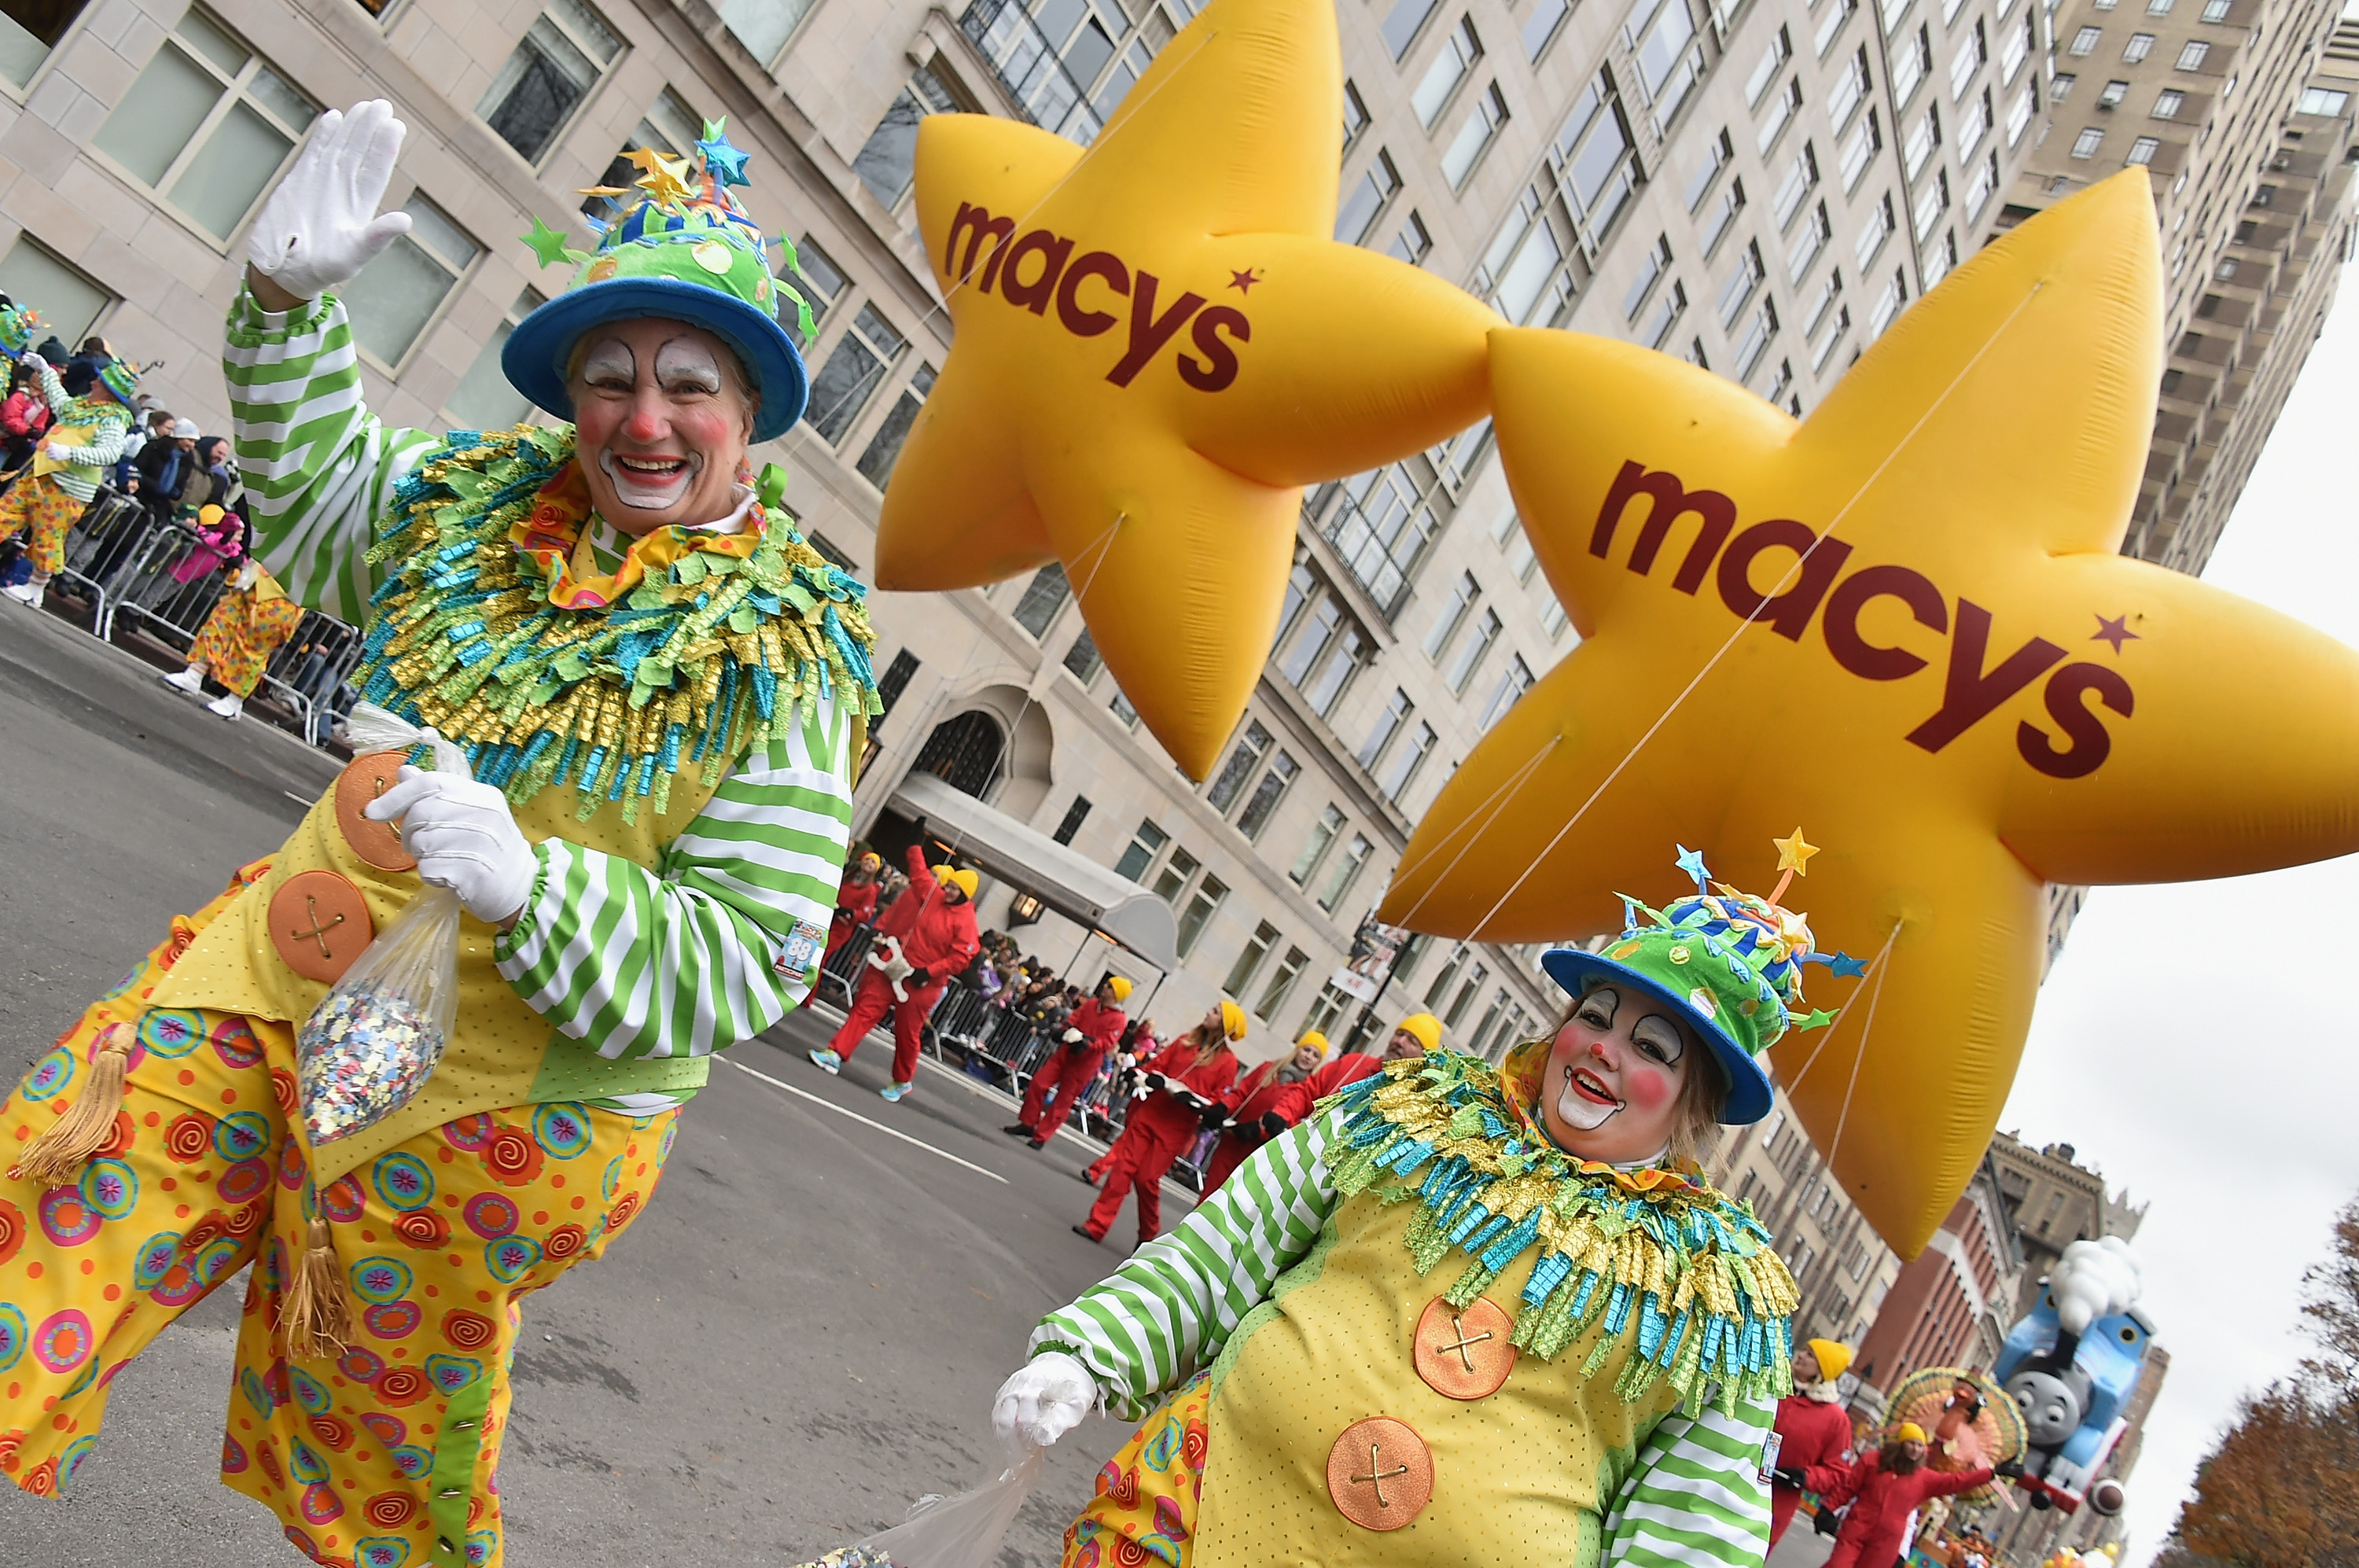 Macy’s Thanksgiving Day Parade 2015 Live Stream Watch Online | Heavy.com - Stream Thanksgiving Day Parade 2015